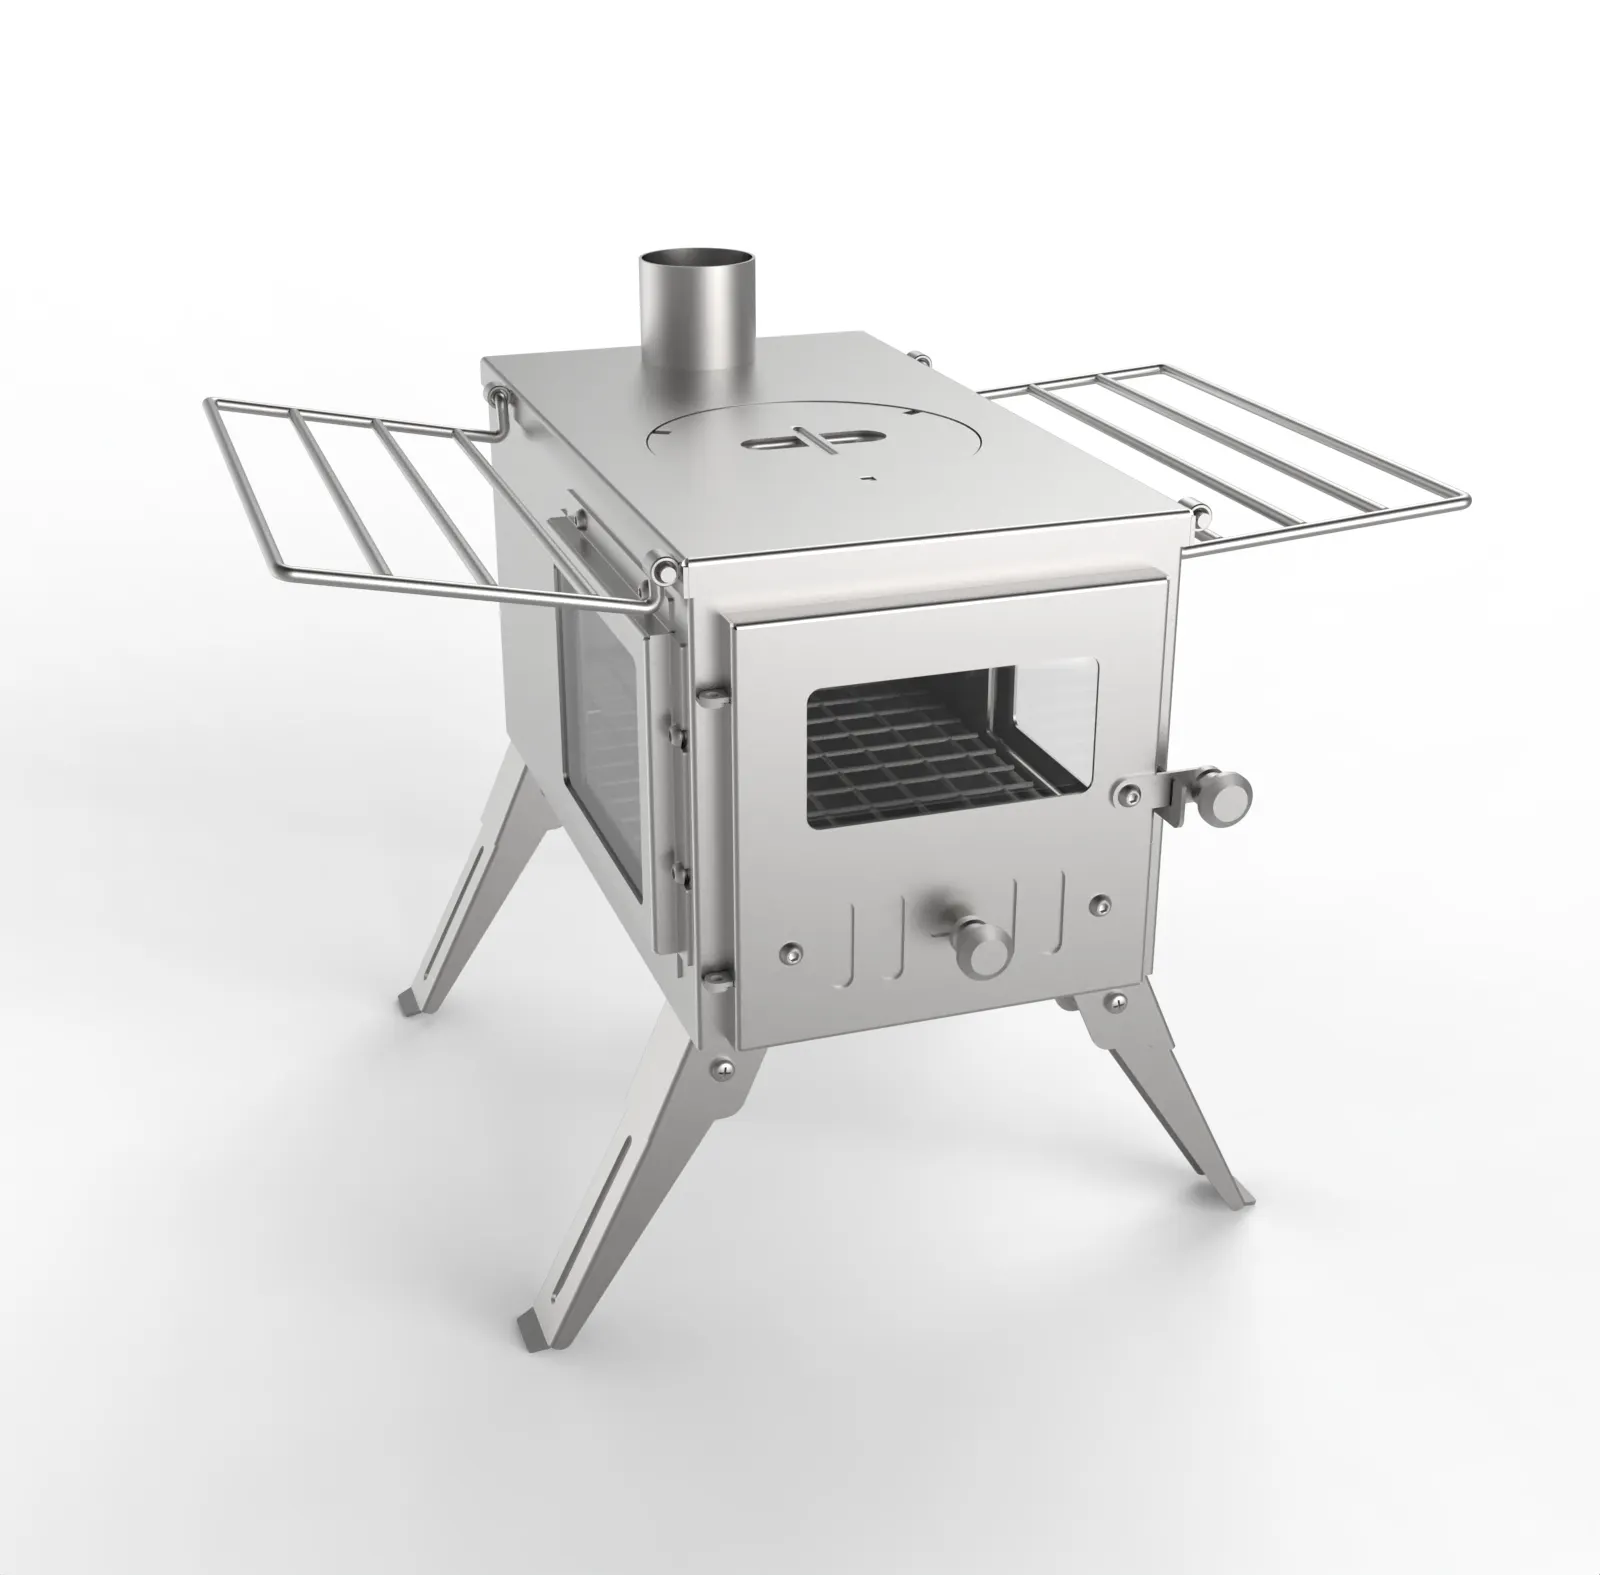 Best Product Portable Camping Stove Wood Burning Stove Stainless Steel Stove